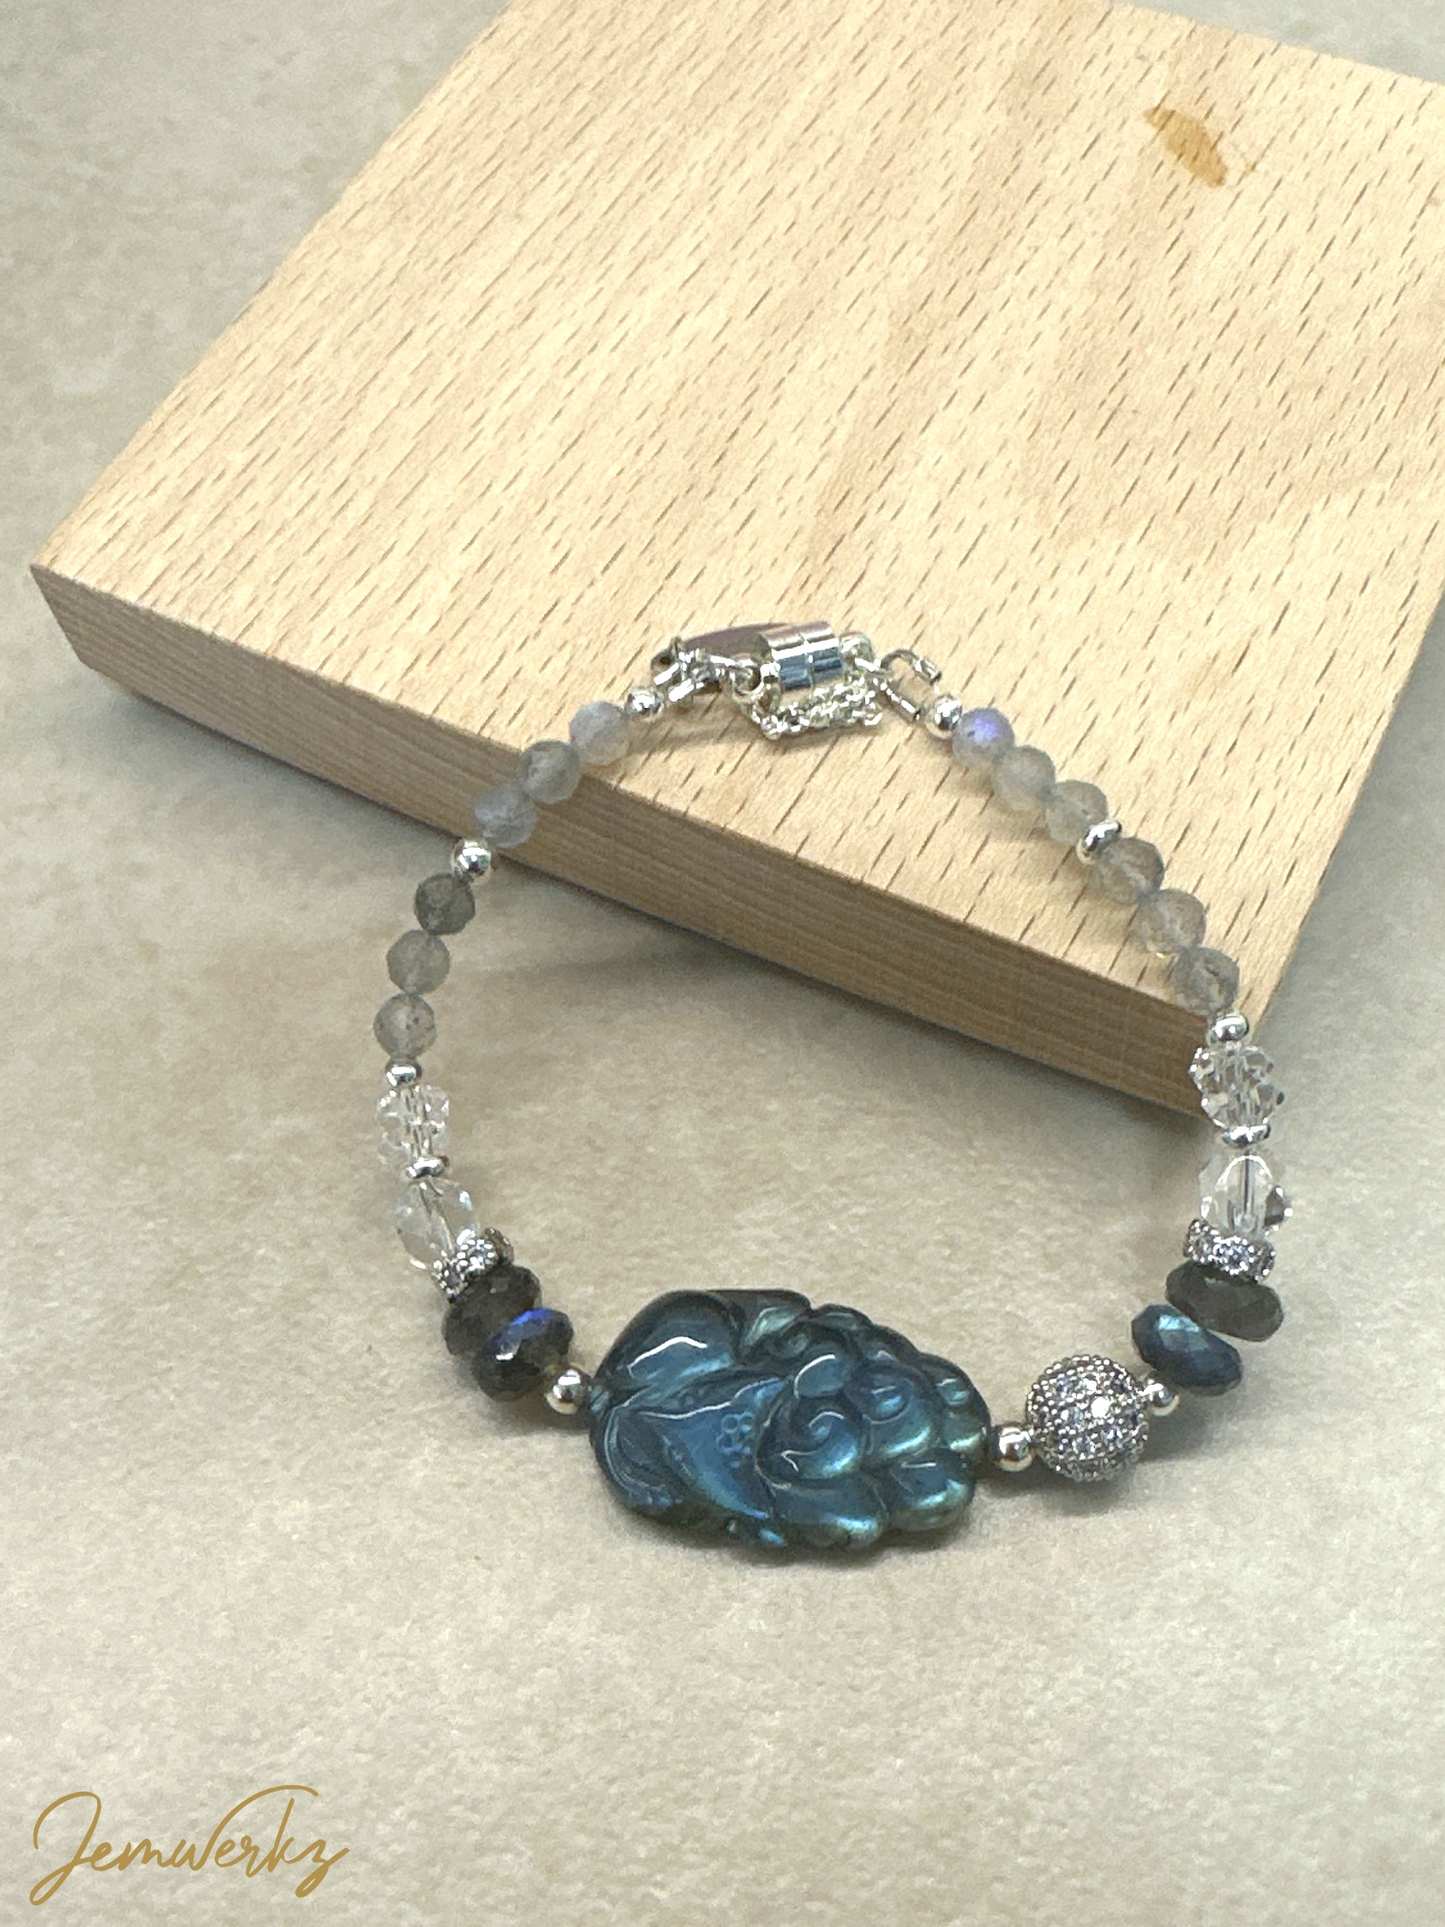 LAVELLE - Labradorite 9-Tailed Fox Bracelet with Faceted Labradorite and Clear Quartz